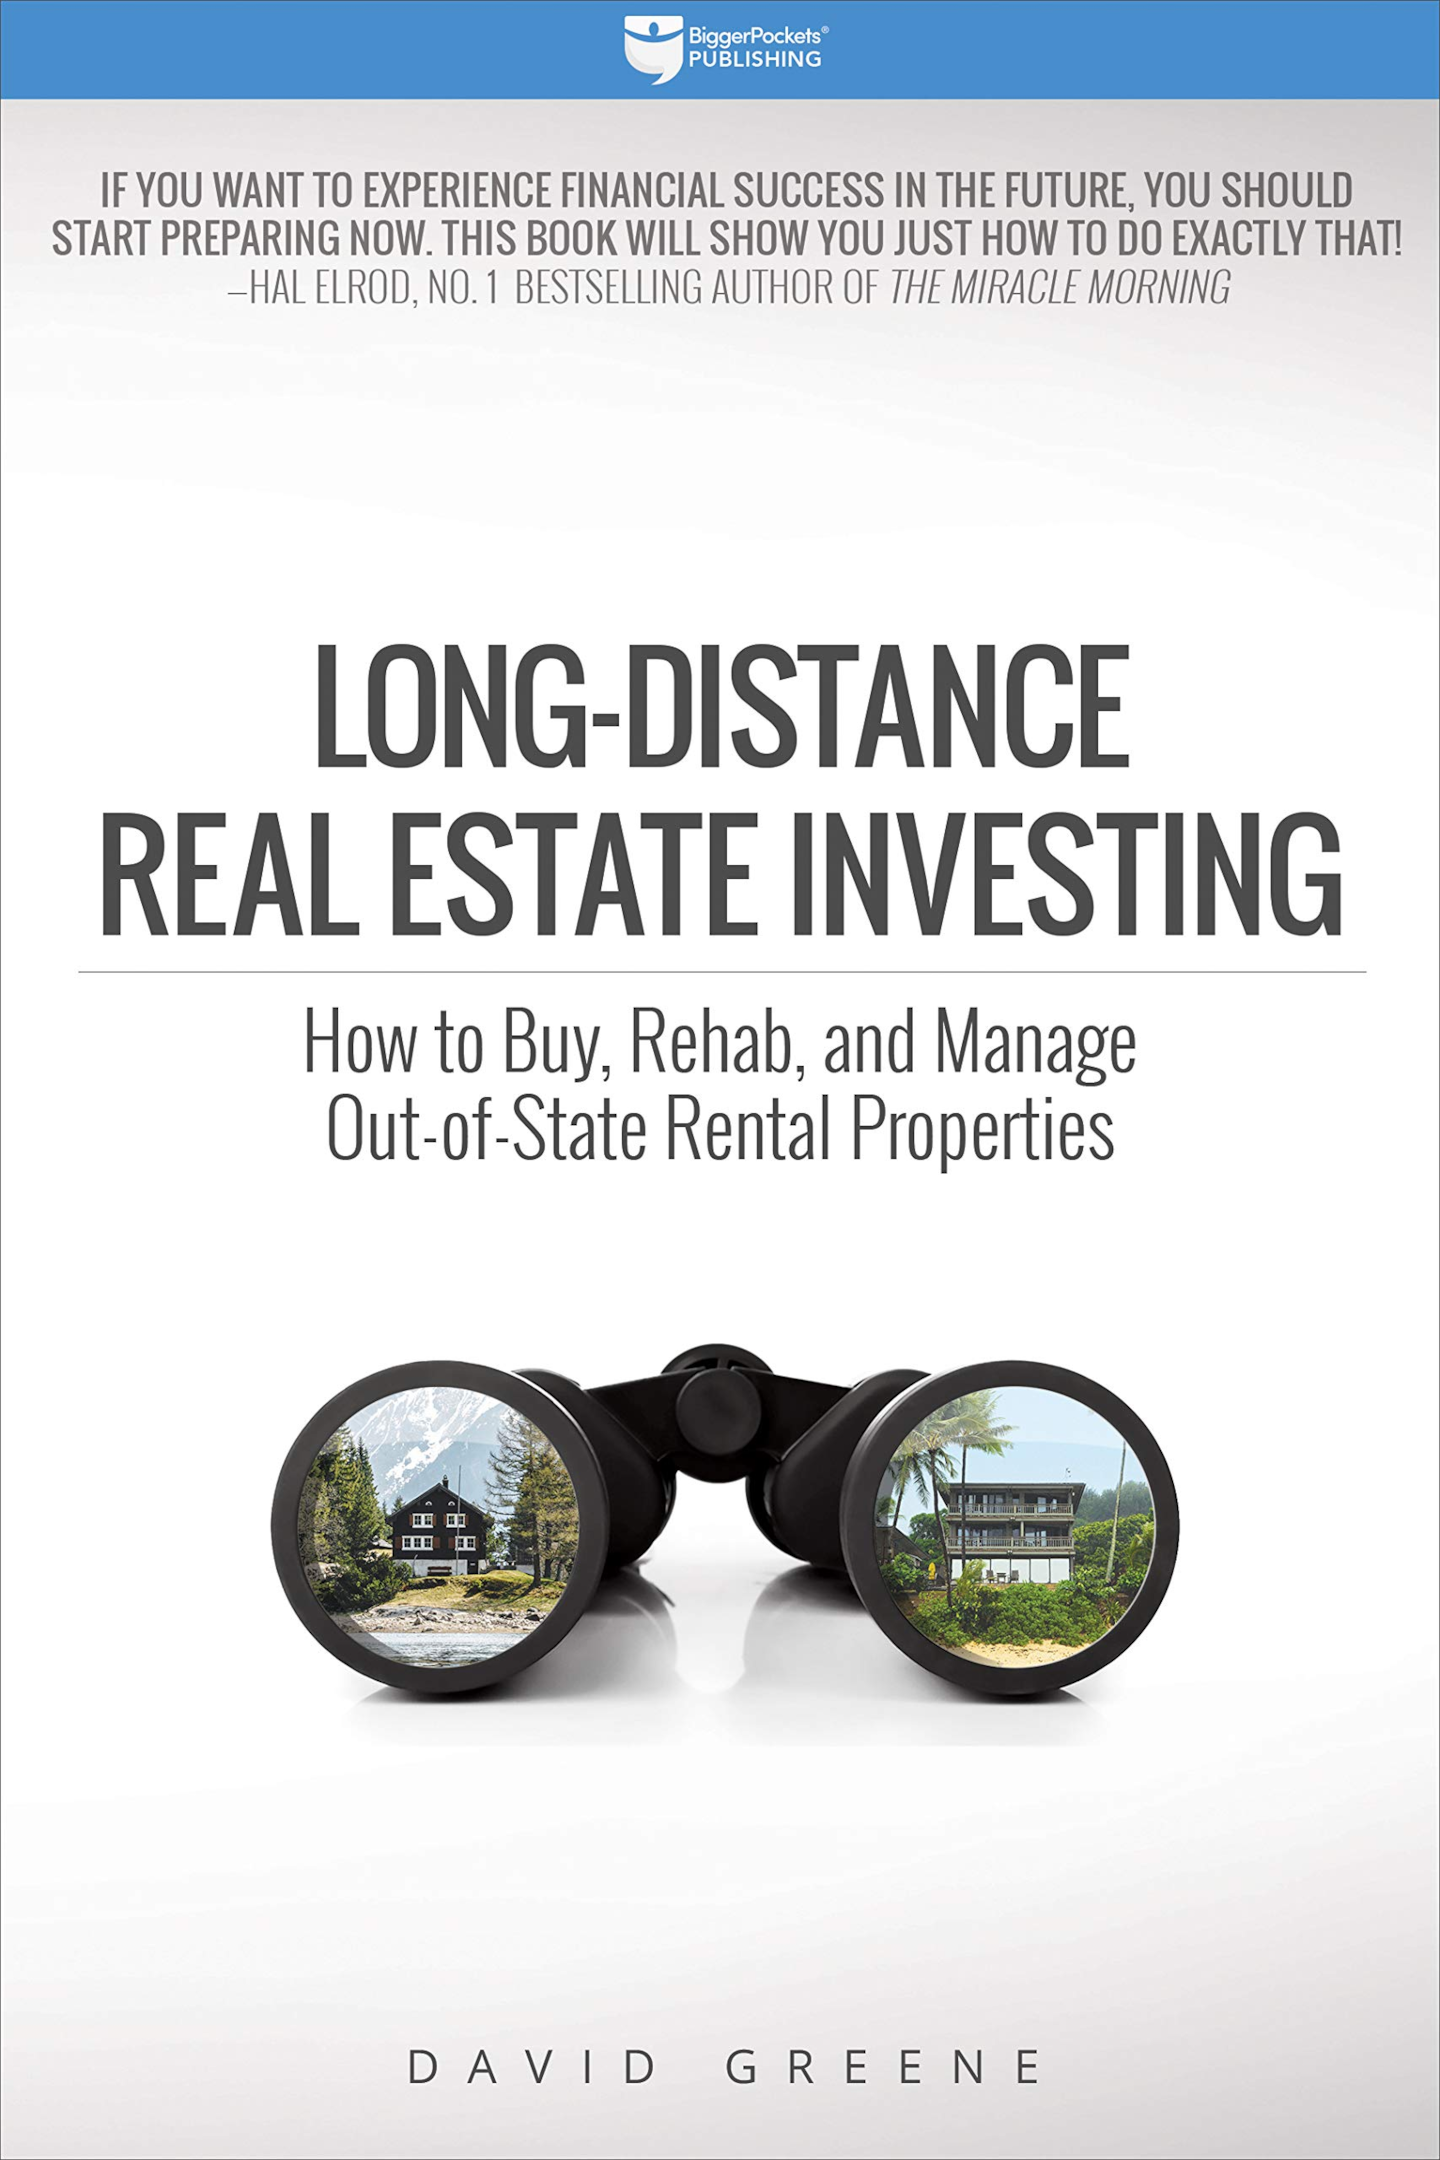 Long-Distance Real Estate Investing | Photo from Amazon.com Website